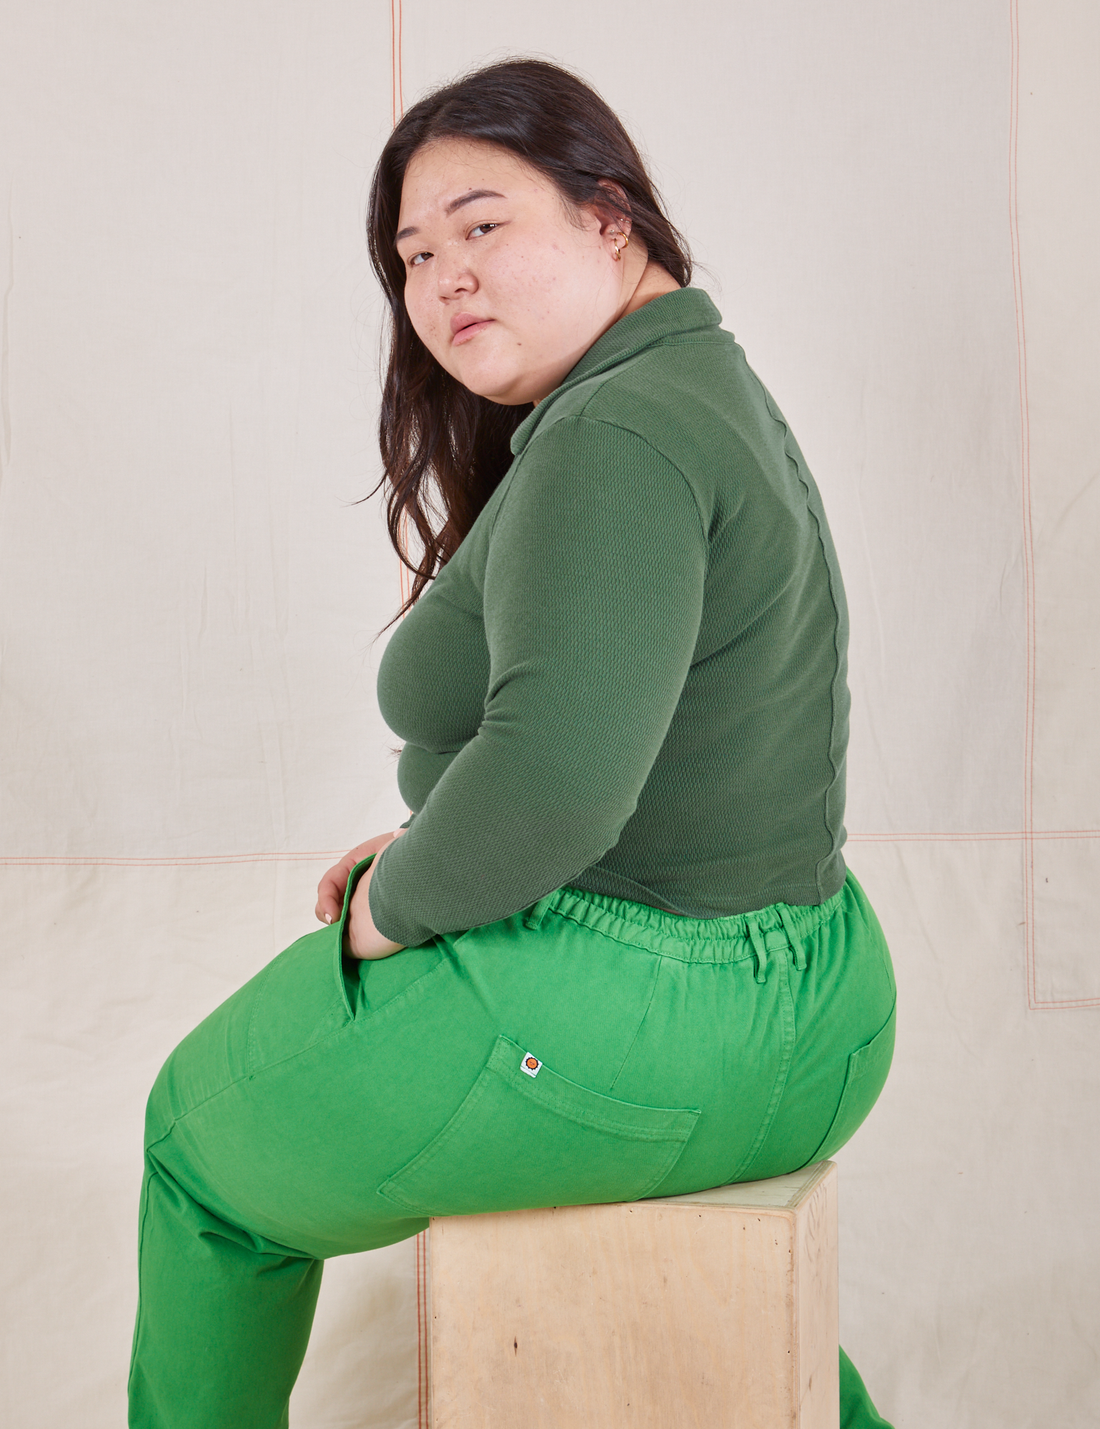 Long Sleeve Fisherman Polo in Dark Emerald Green side view on Ashley wearing kelly green Work Pants sitting on wooden crate